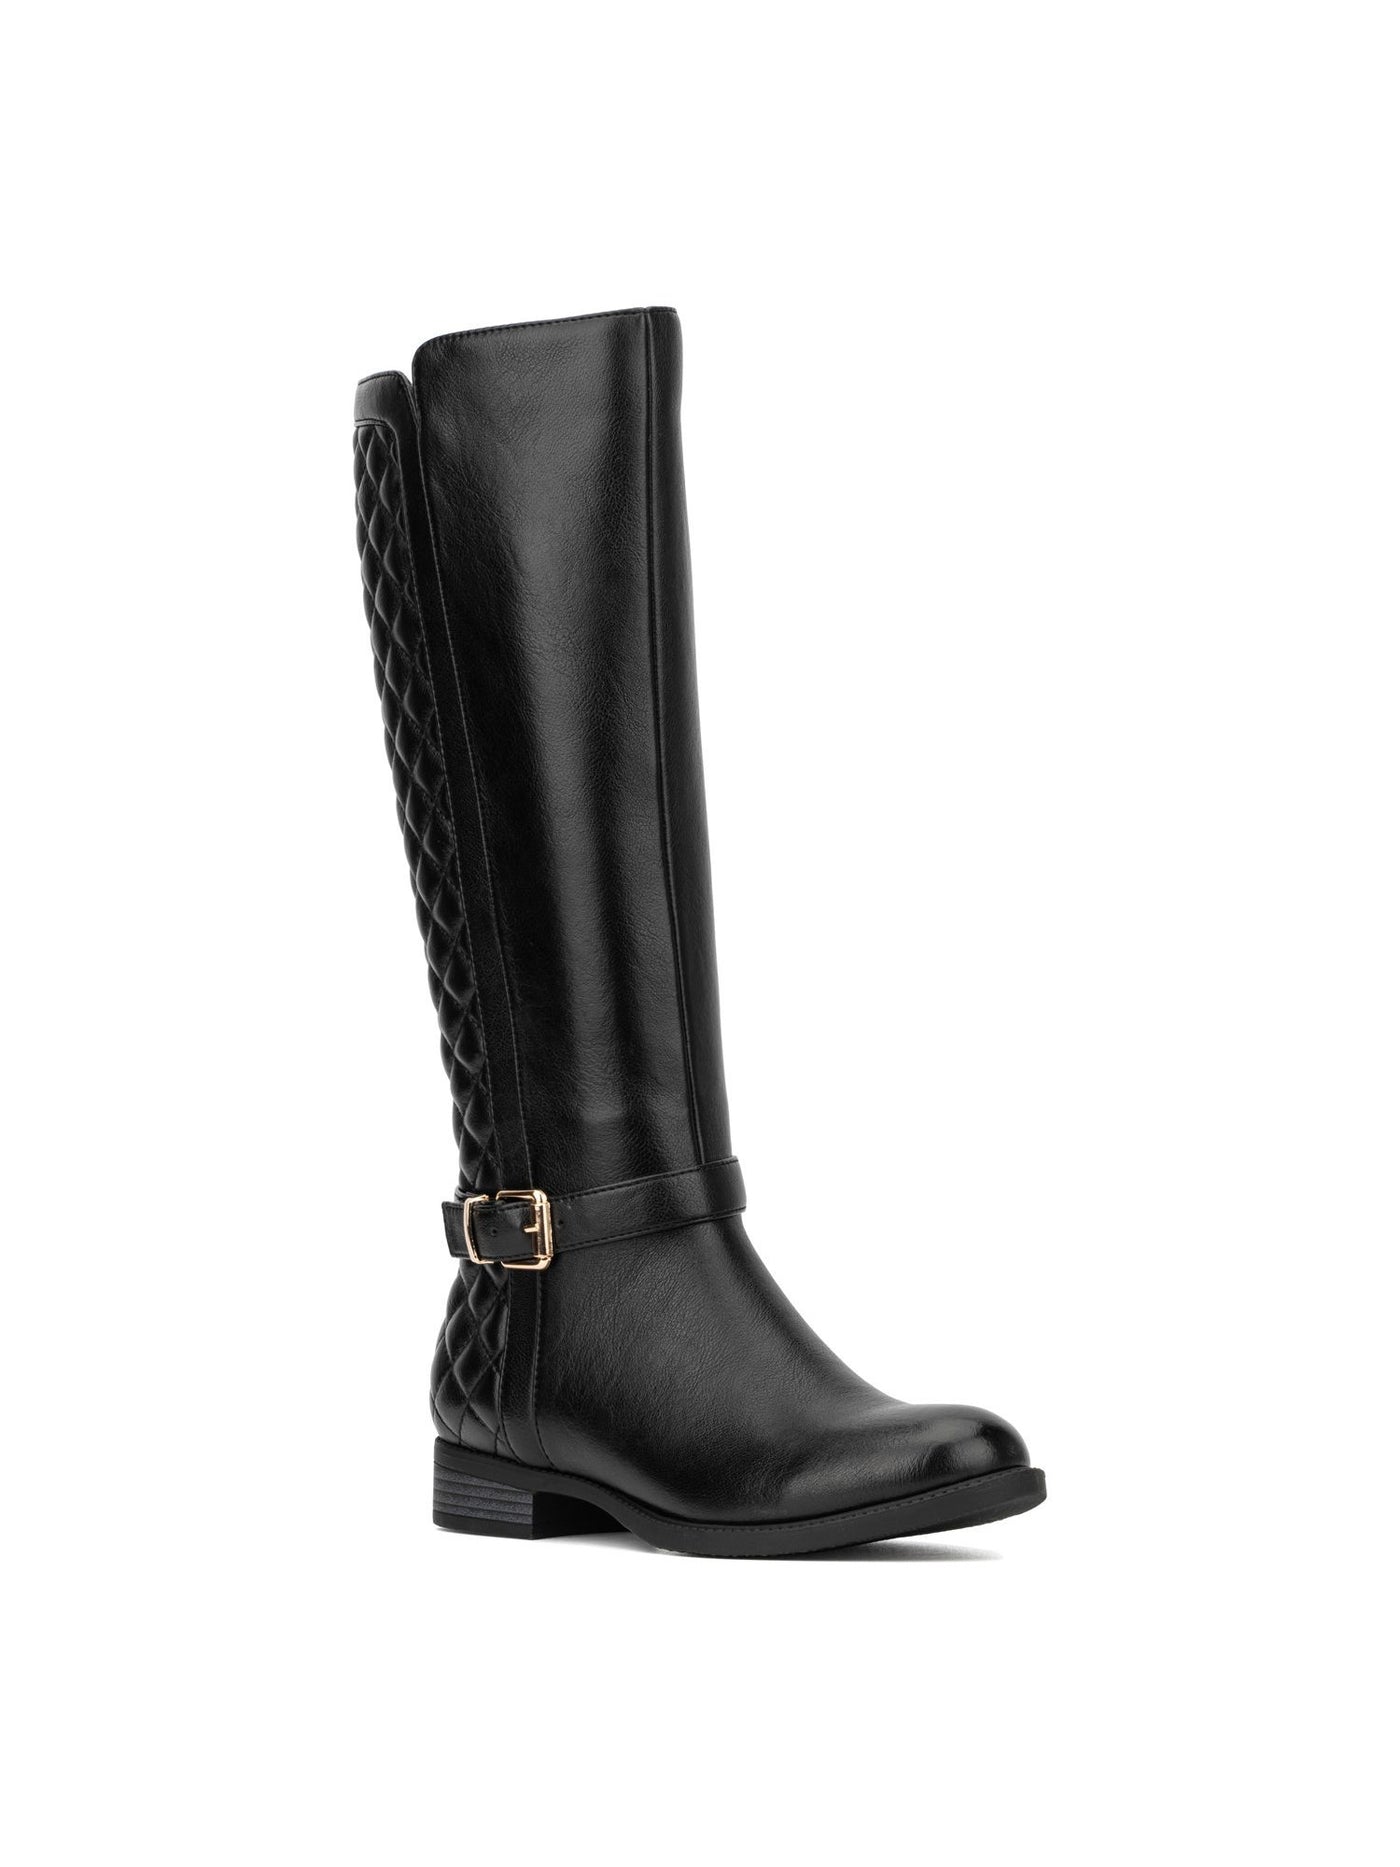 NEW YORK & CO Womens Black Diamond Pattern Back Buckle Accent Padded Enola Round Toe Block Heel Zip-Up Boots Shoes 7